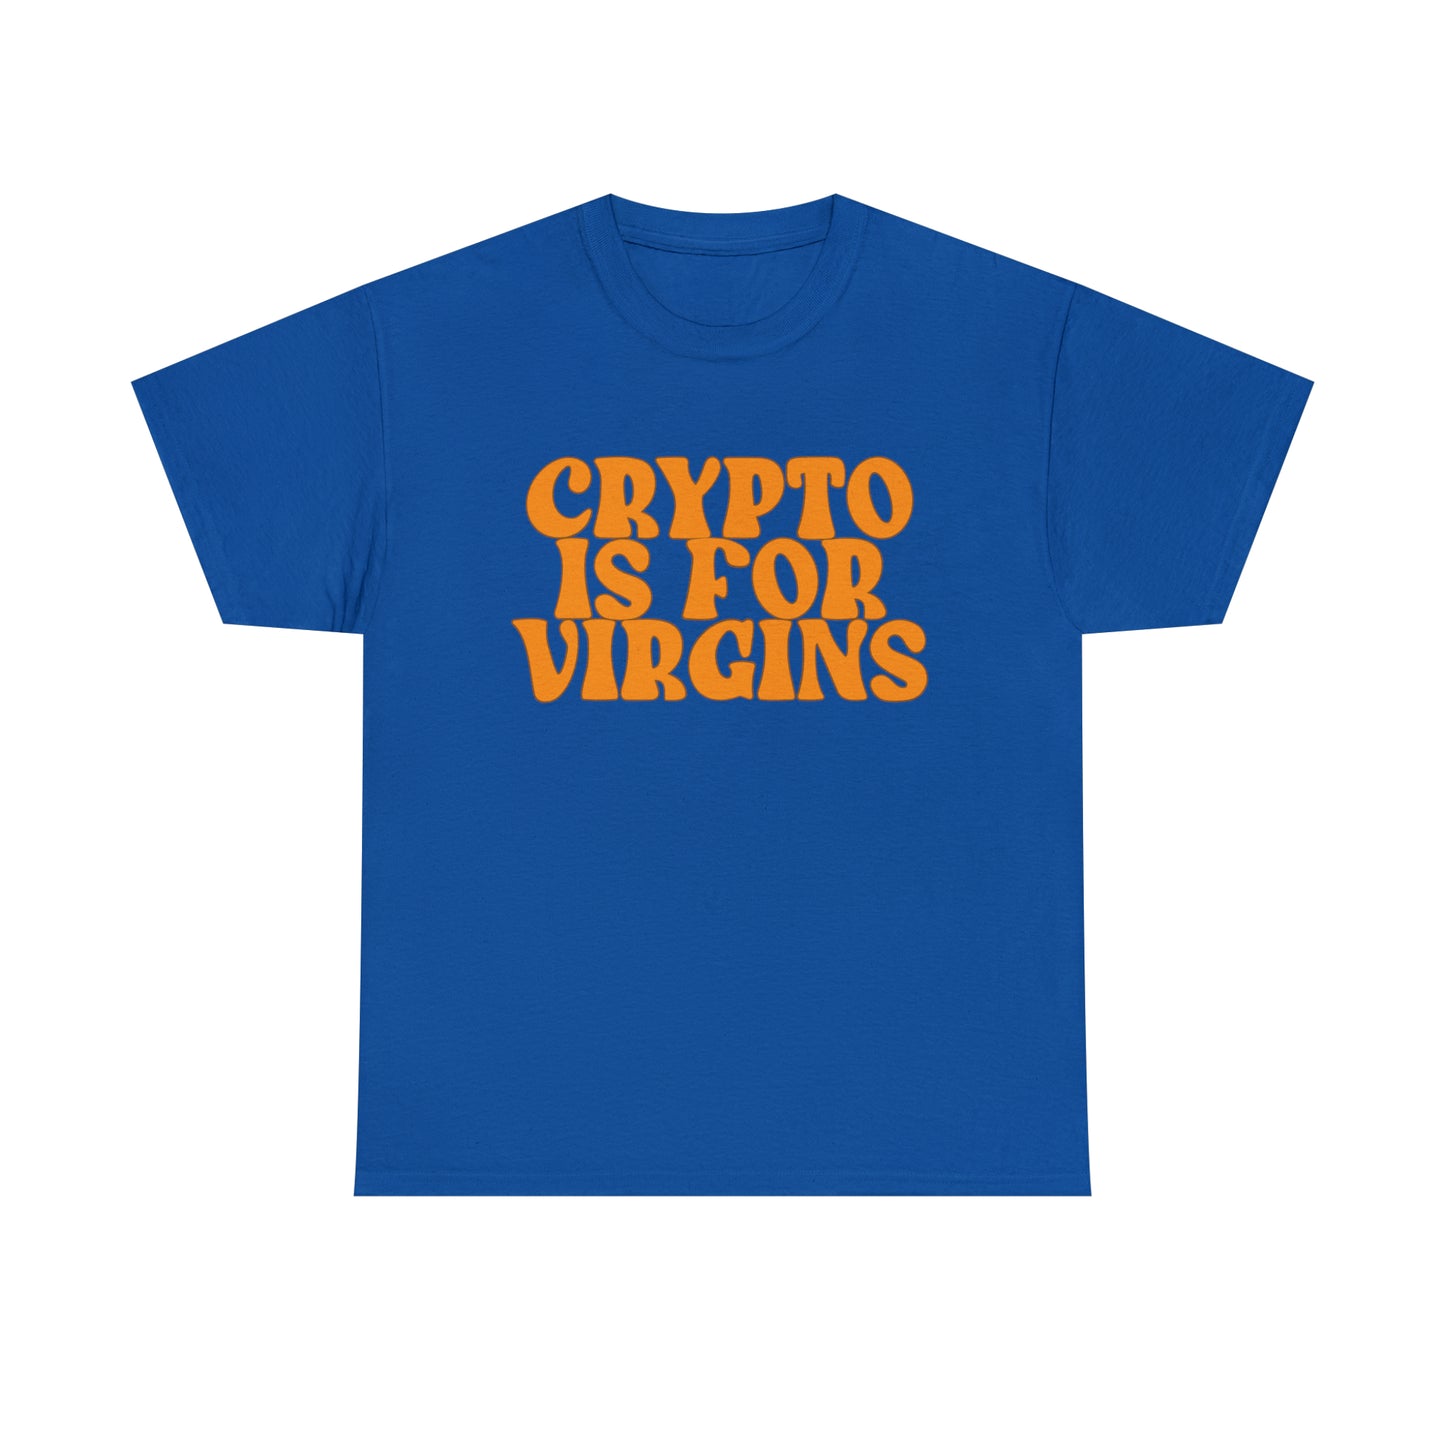 "Crypto Is For Virgins" Tee